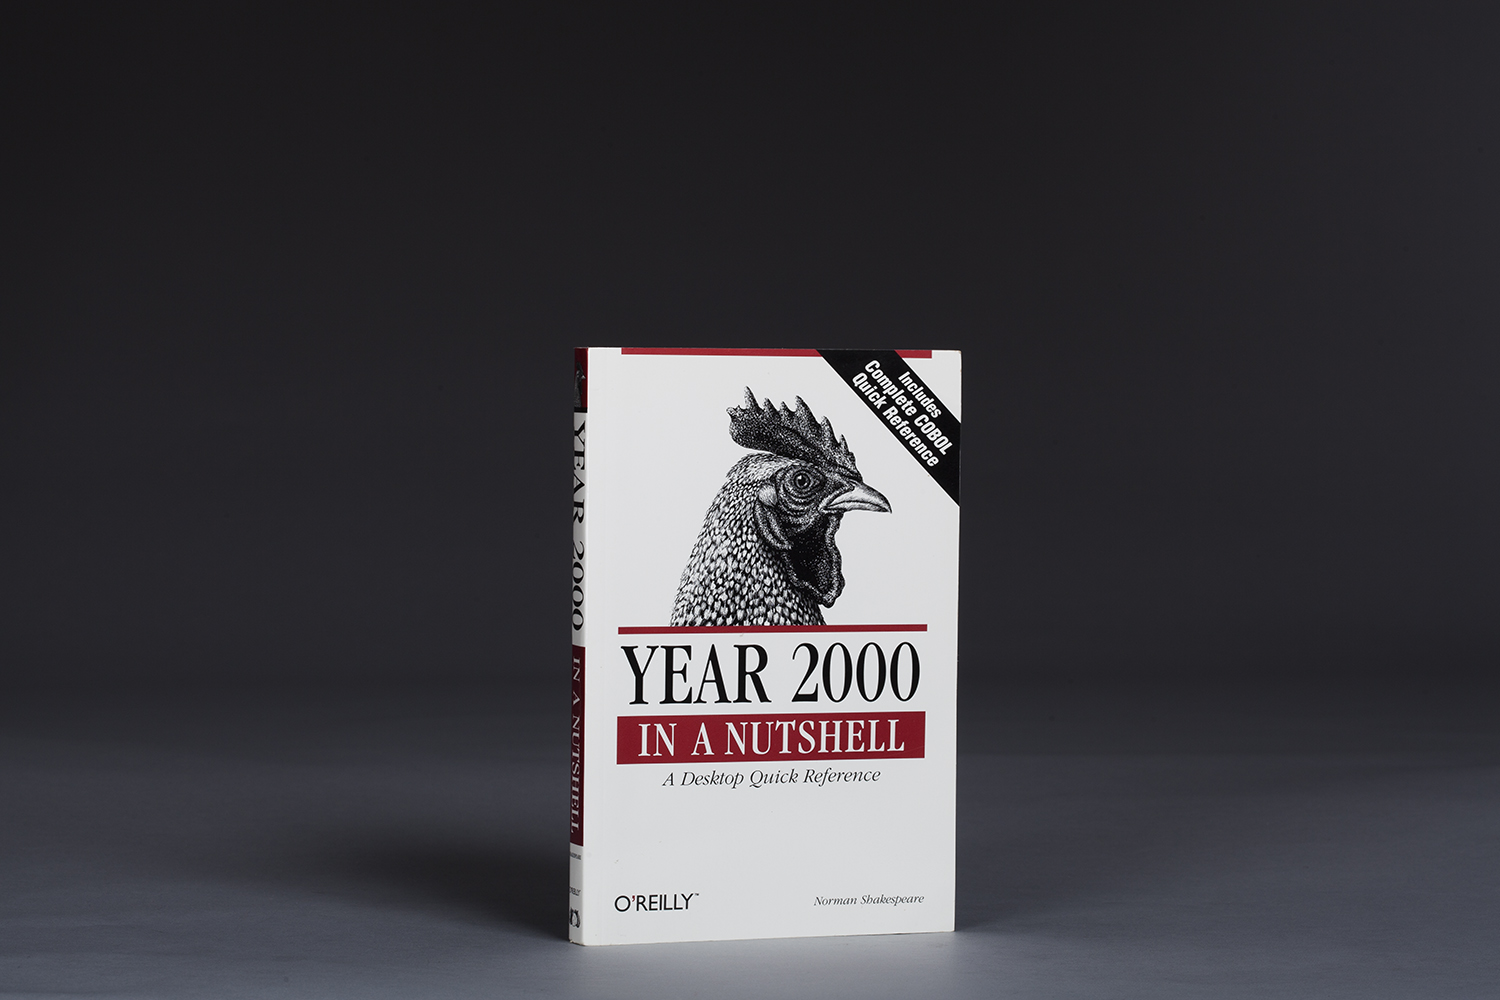 Year 2000 In a Nutshell - A Desktop Quick Reference - 0394 Cover.jpg